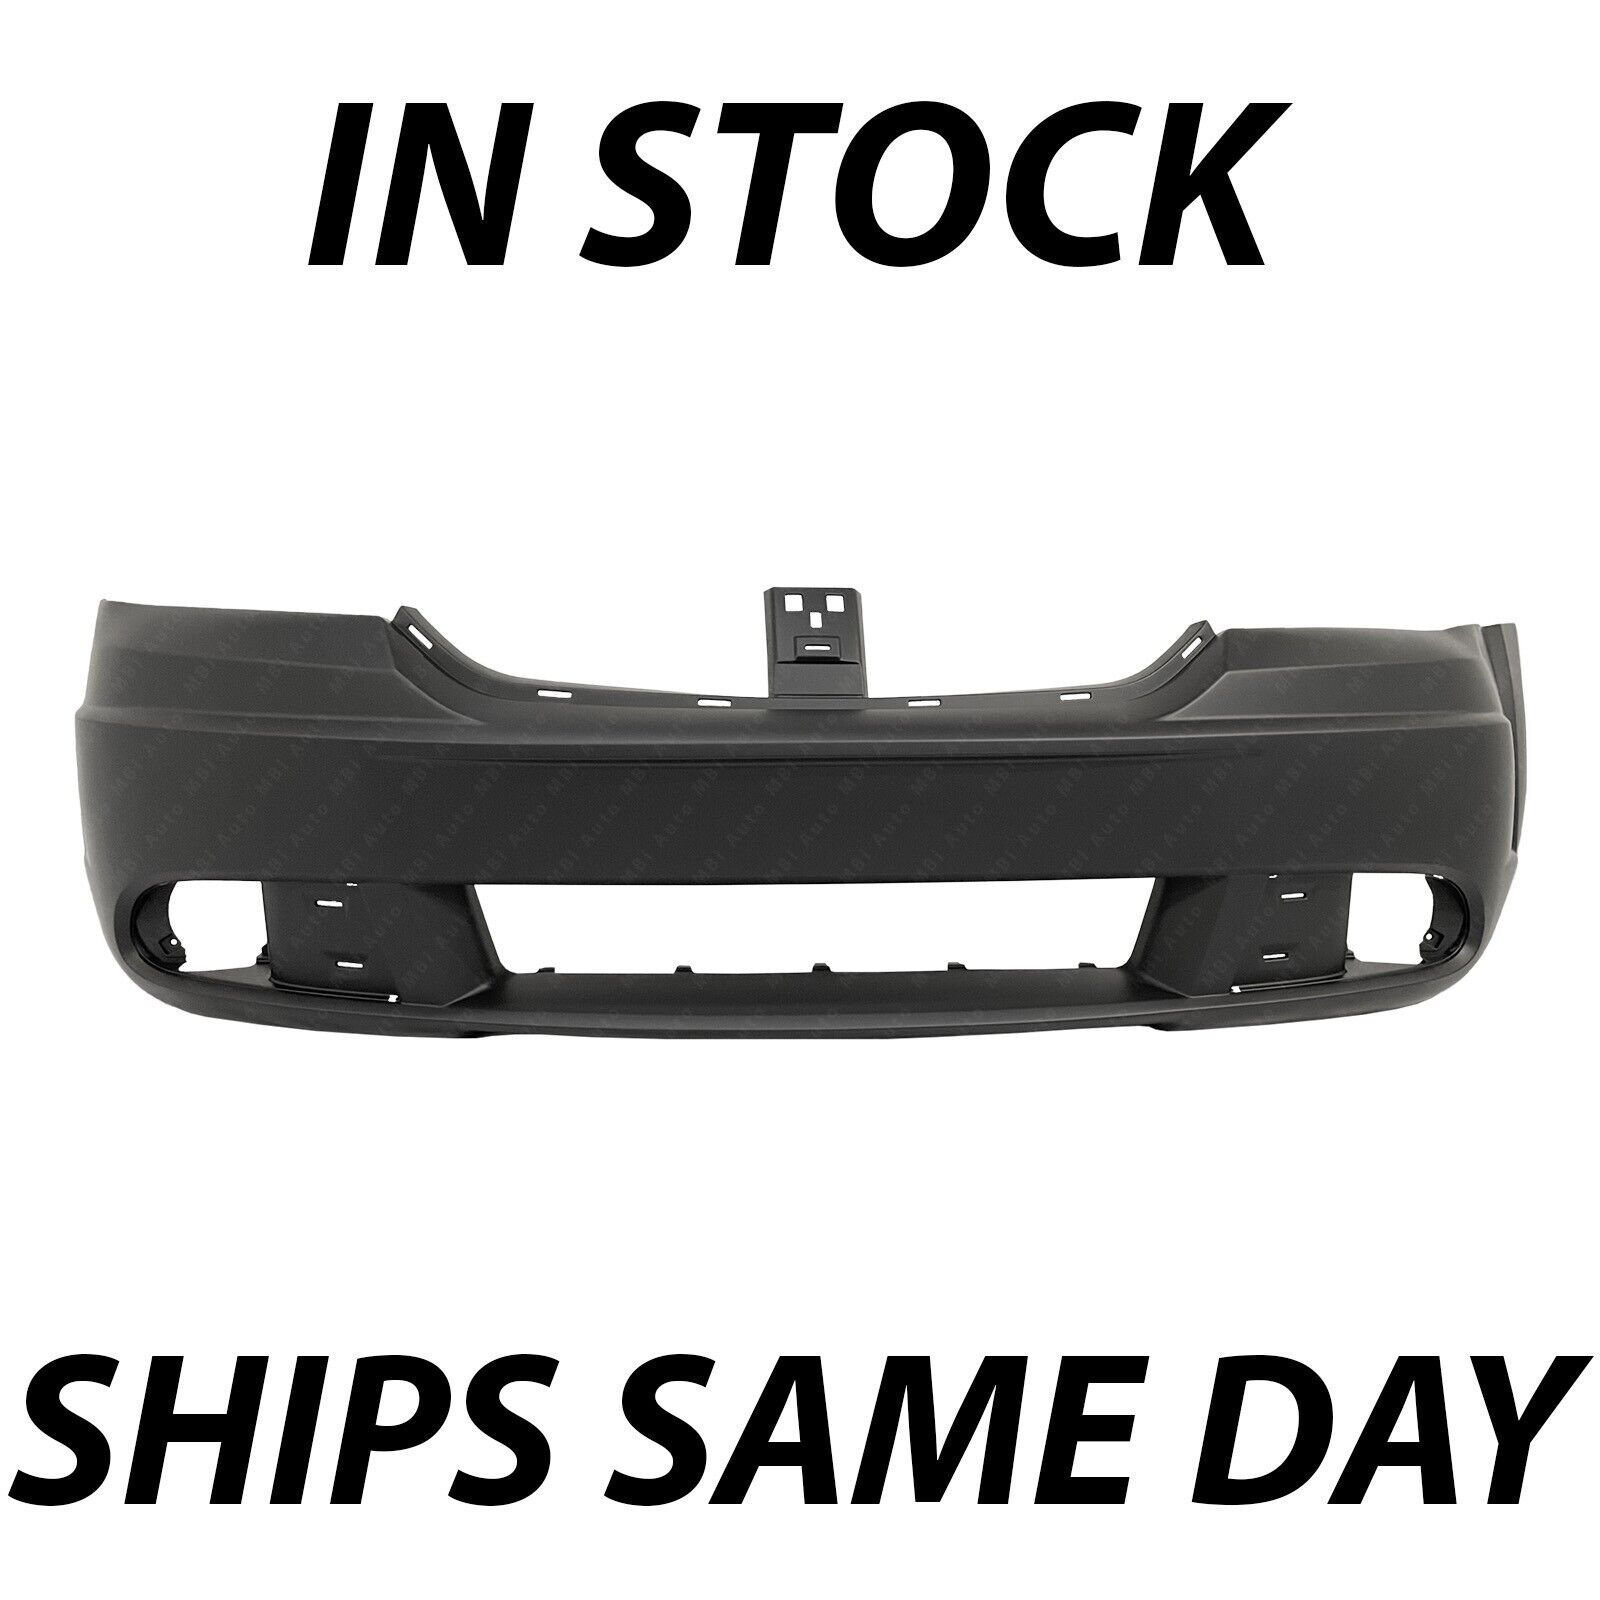 NEW Primered - Front Bumper Cover Replacement for 2009-2018 Dodge Journey 09-18